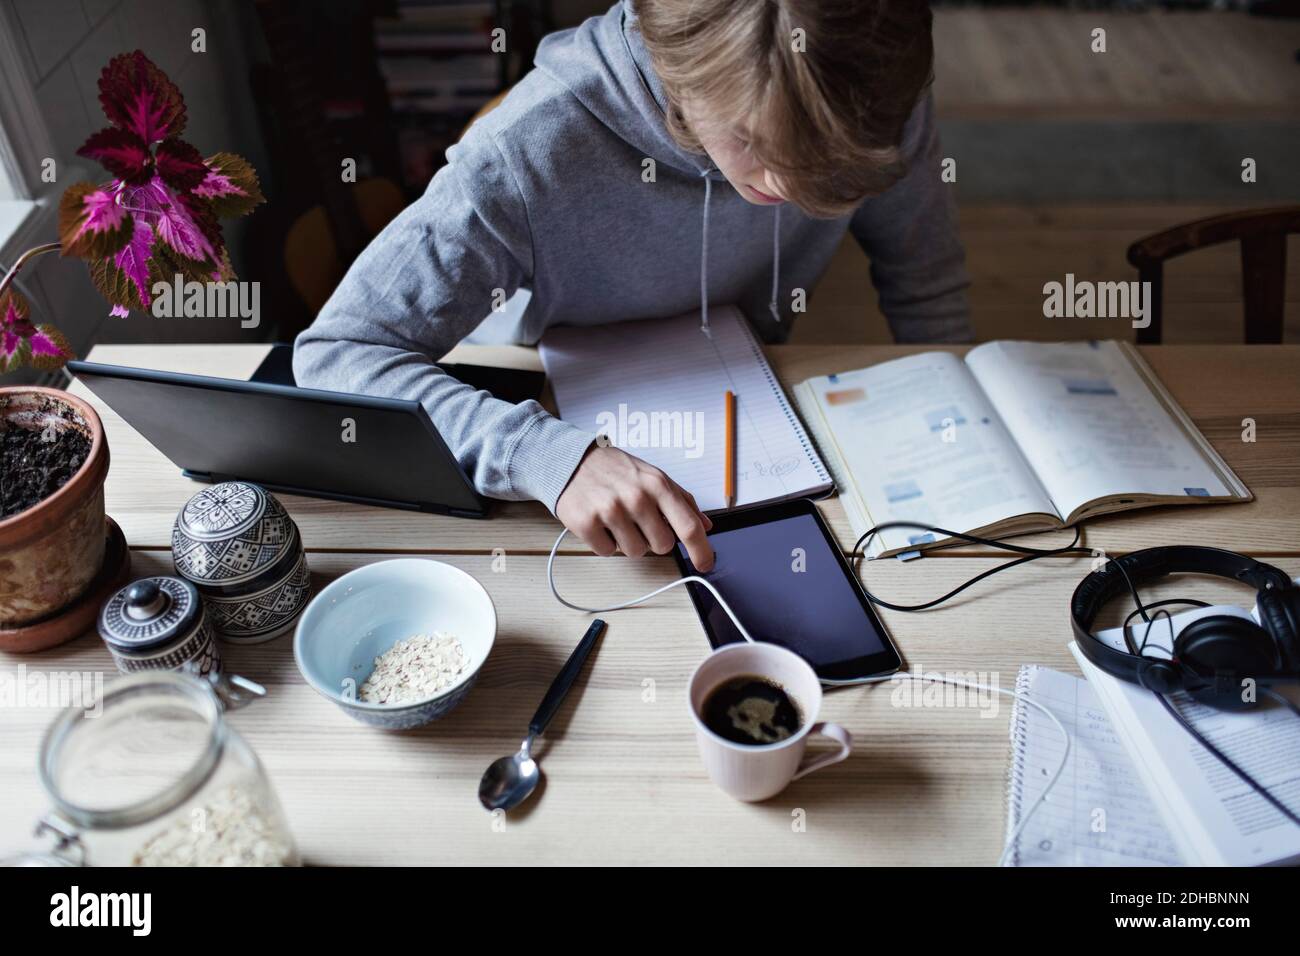 High angle view of teenage boy using digital tablet while studying on table at home Stock Photo